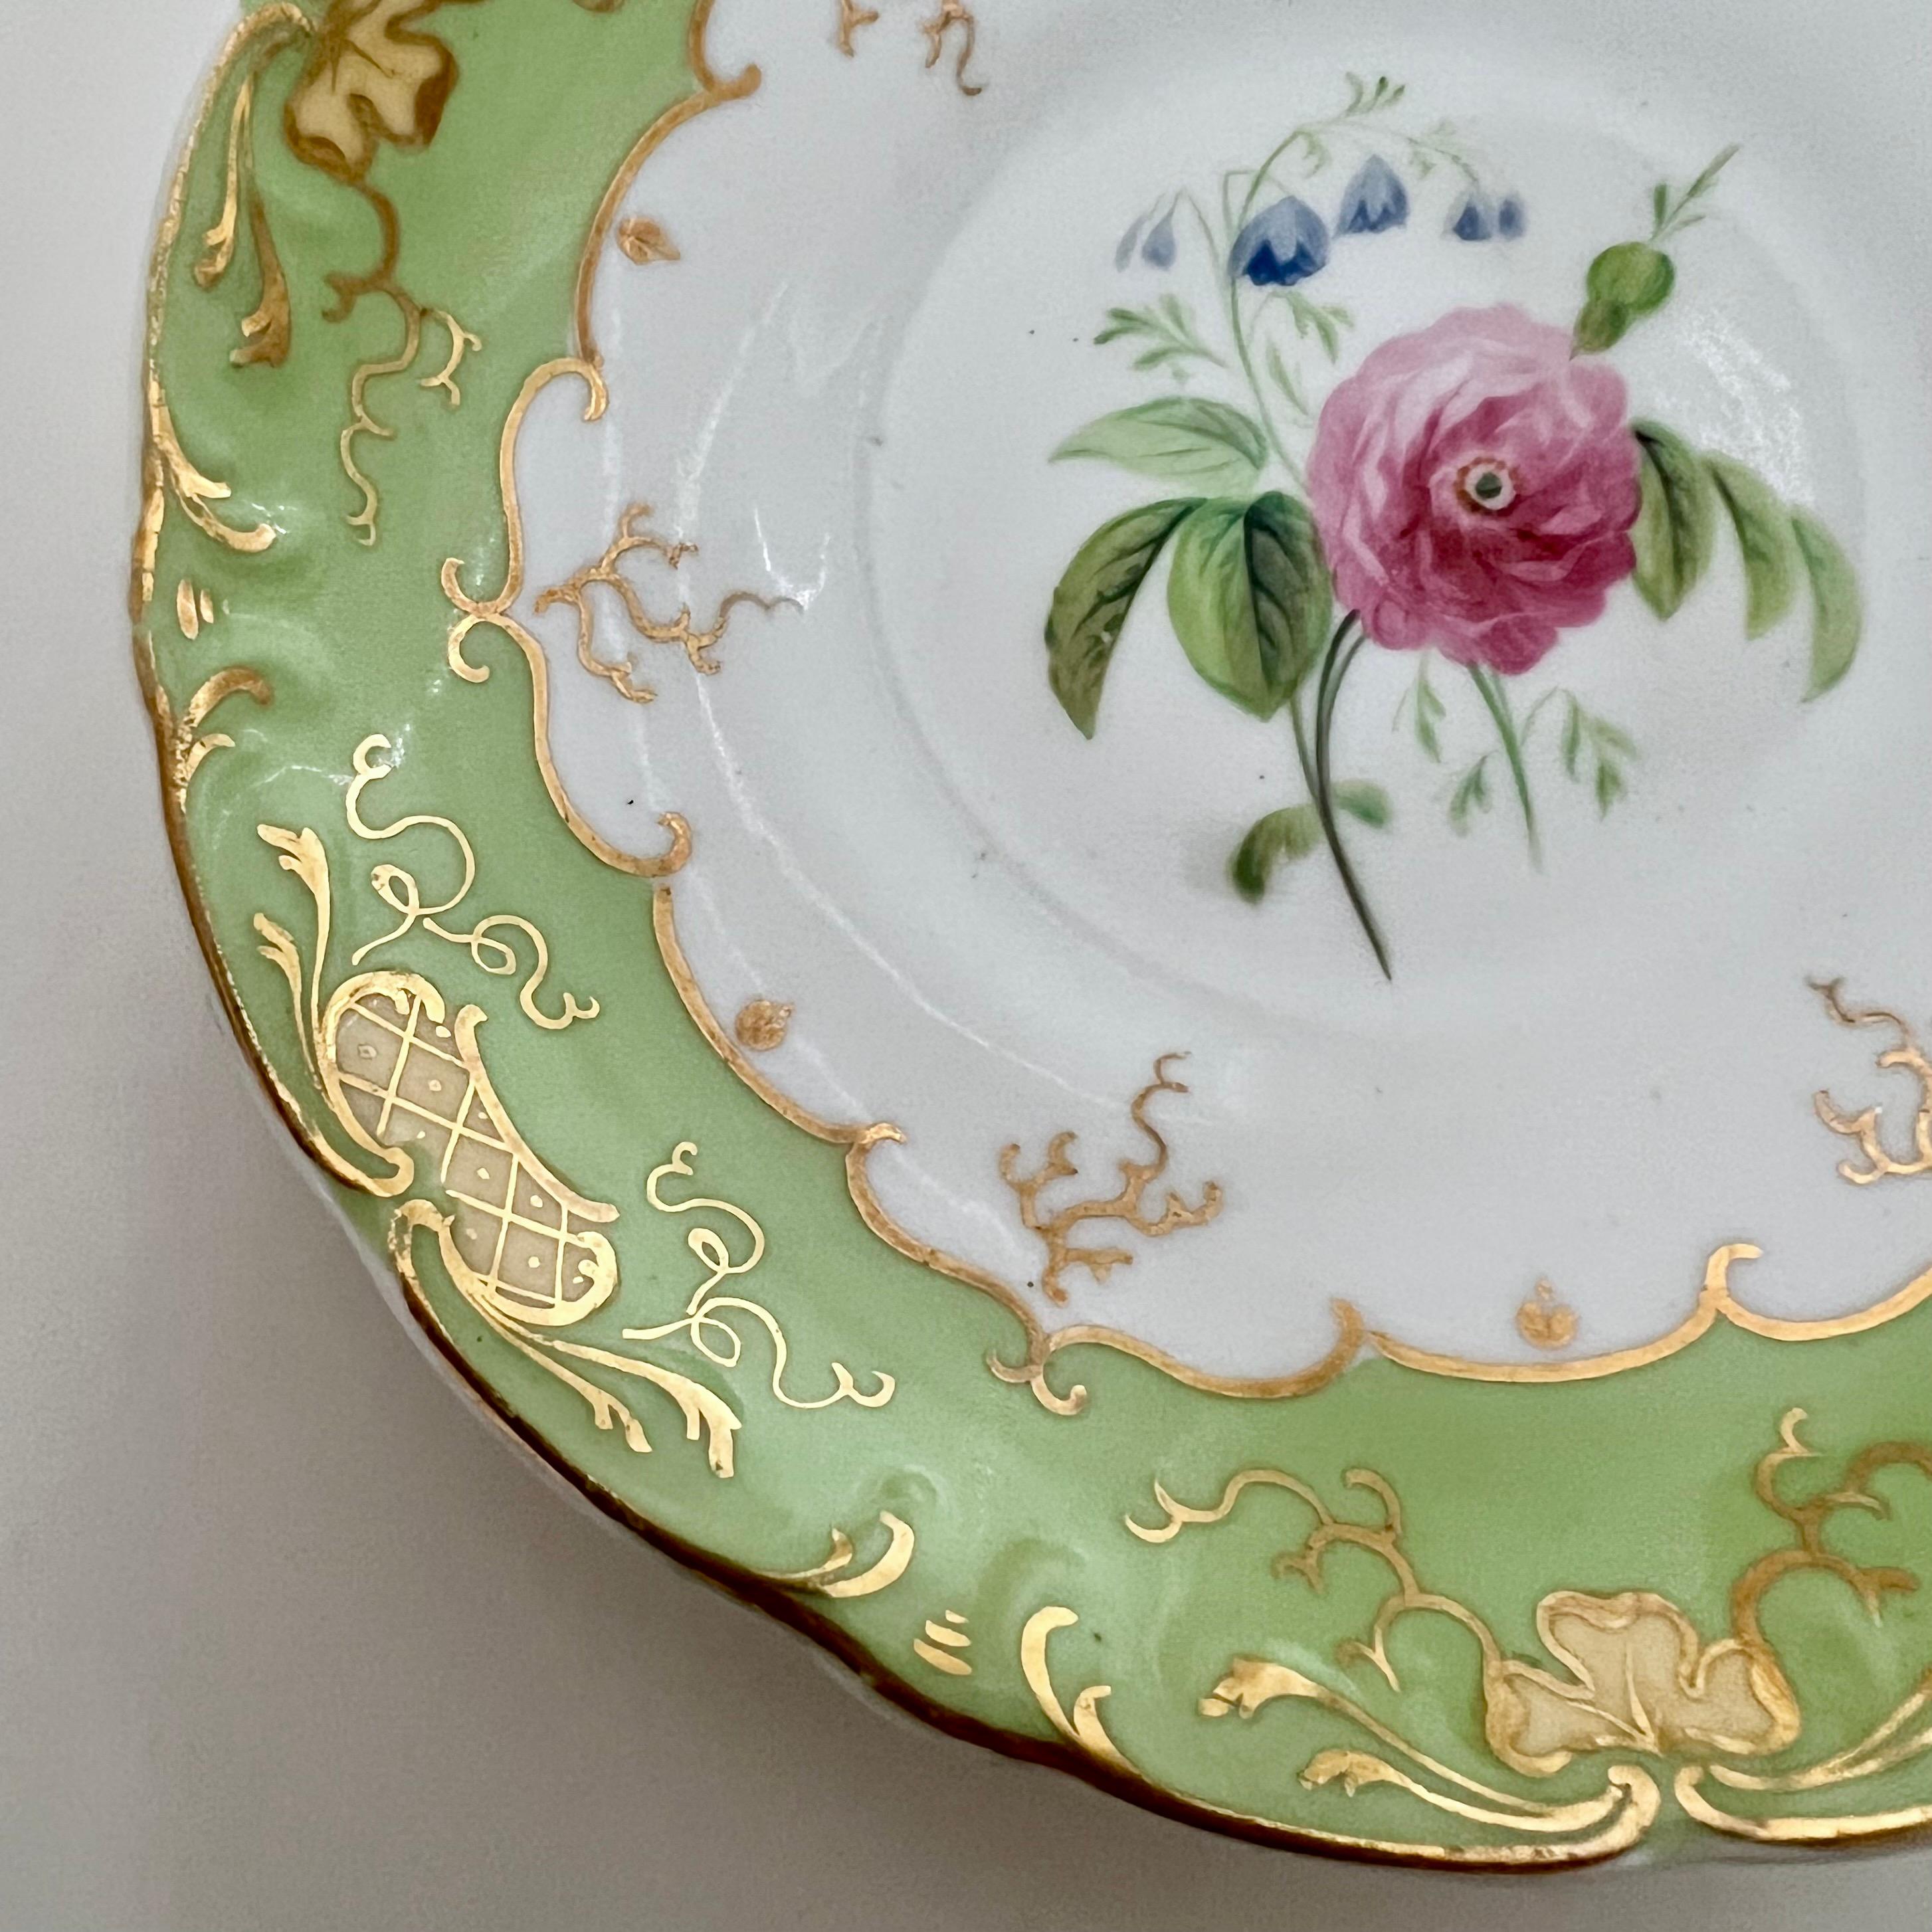 H & R Daniel Porcelain Teacup, Apple Green with Pink Roses, Rococo Revival C1840 7